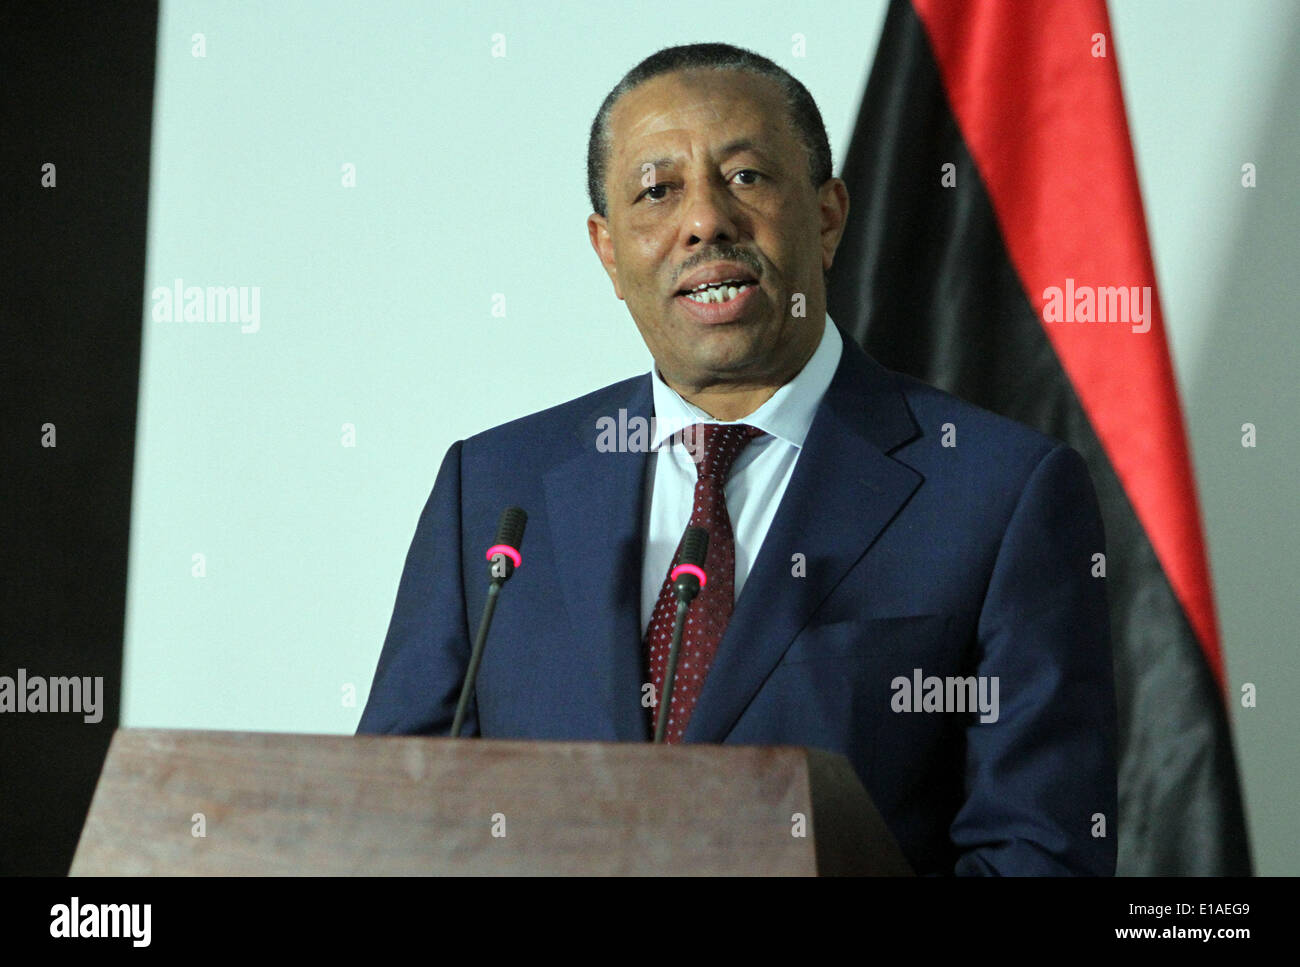 Tripoli, Libya. 28th May, 2014. Outgoing Libyan Prime Minister Abdullah Thinni addresses a press conference in Tripoli, Libya, on May 28, 2014. Abdullah Thinni on Wednesday asked for court ruling on a previous controversial parliamentary vote which deprived him of power. © Hamza Turkia/Xinhua/Alamy Live News Stock Photo